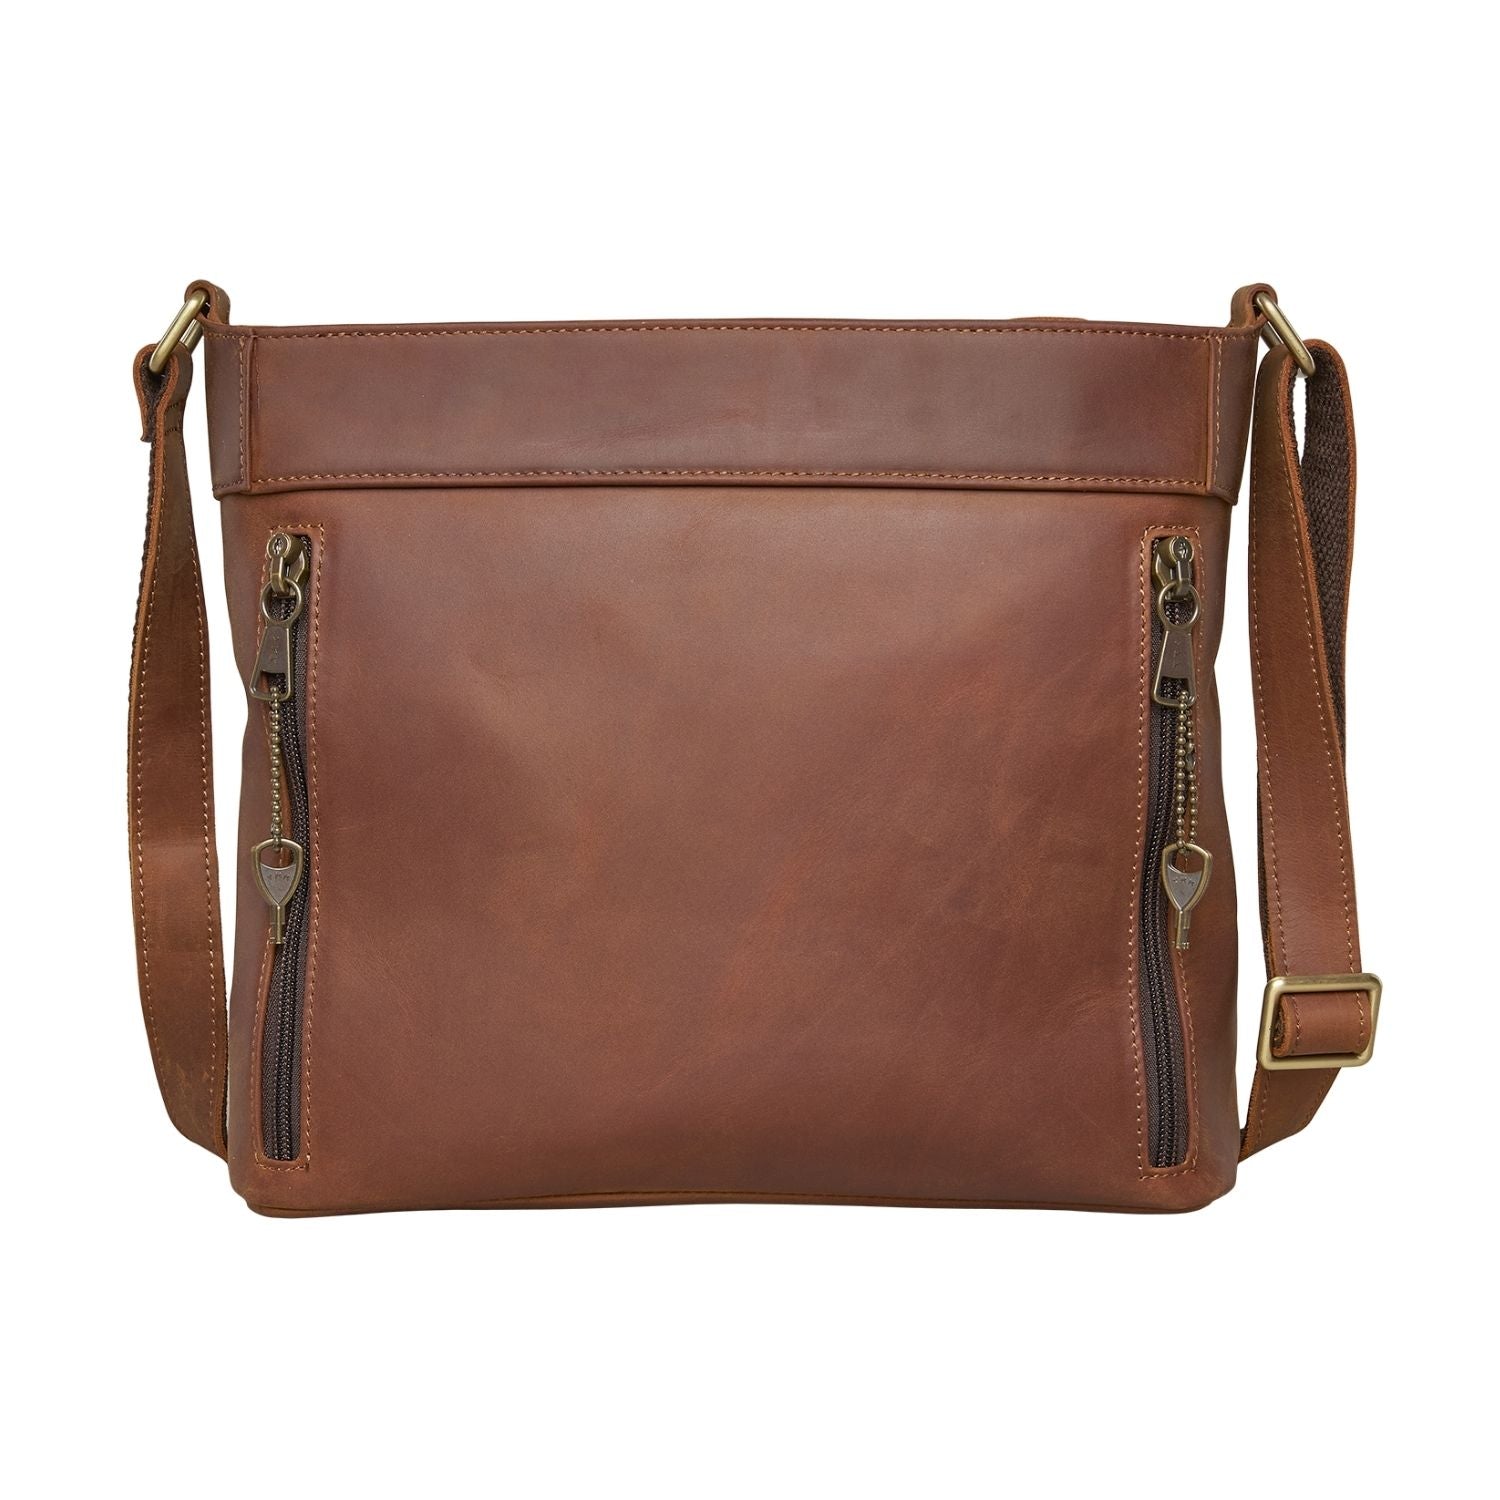 Delaney Concealed Carry Leather Crossbody - Mahogany